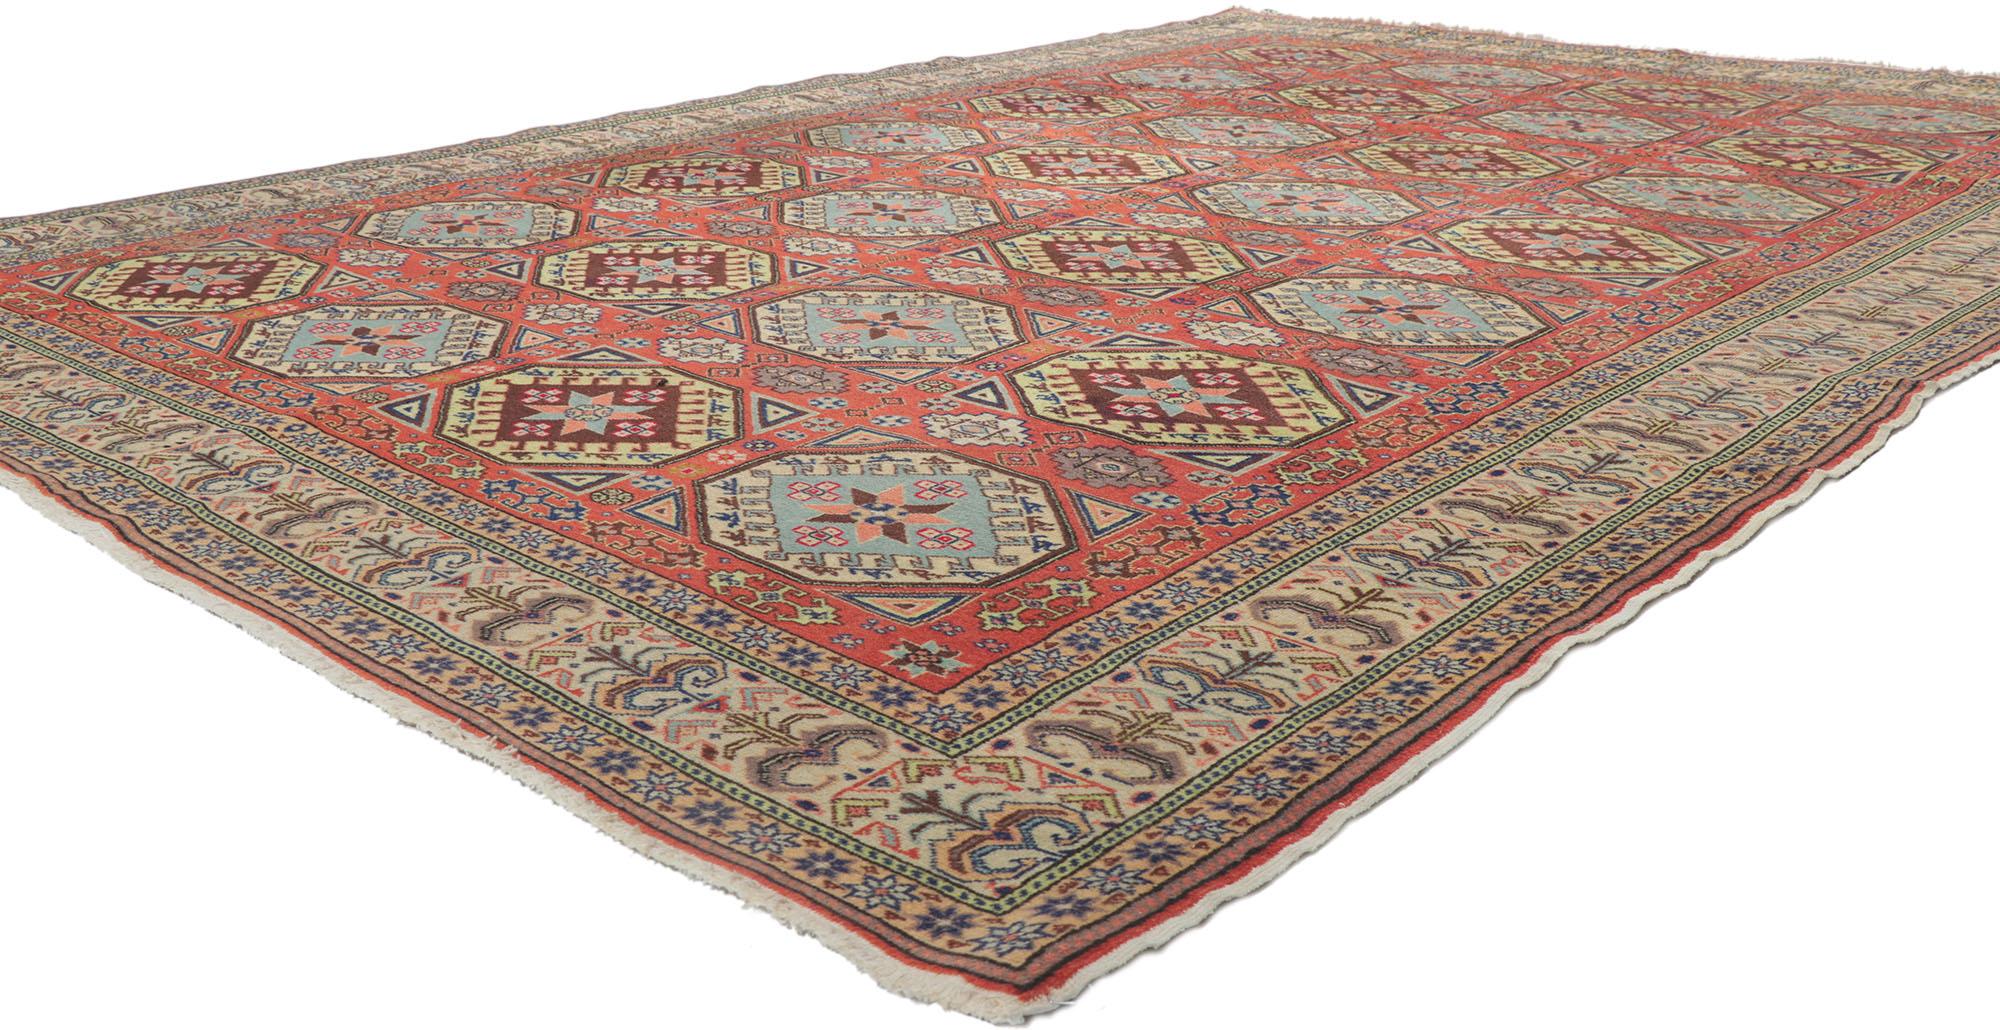 ​78284 Vintage Turkish Sivas Rug, 07'07 x 10'08.
Introducing the enchanting hand-knotted wool distressed vintage Turkish Sivas rug! Feast your eyes on its captivating allover geometric pattern, gracefully sprawled across a mesmerizing abrashed red